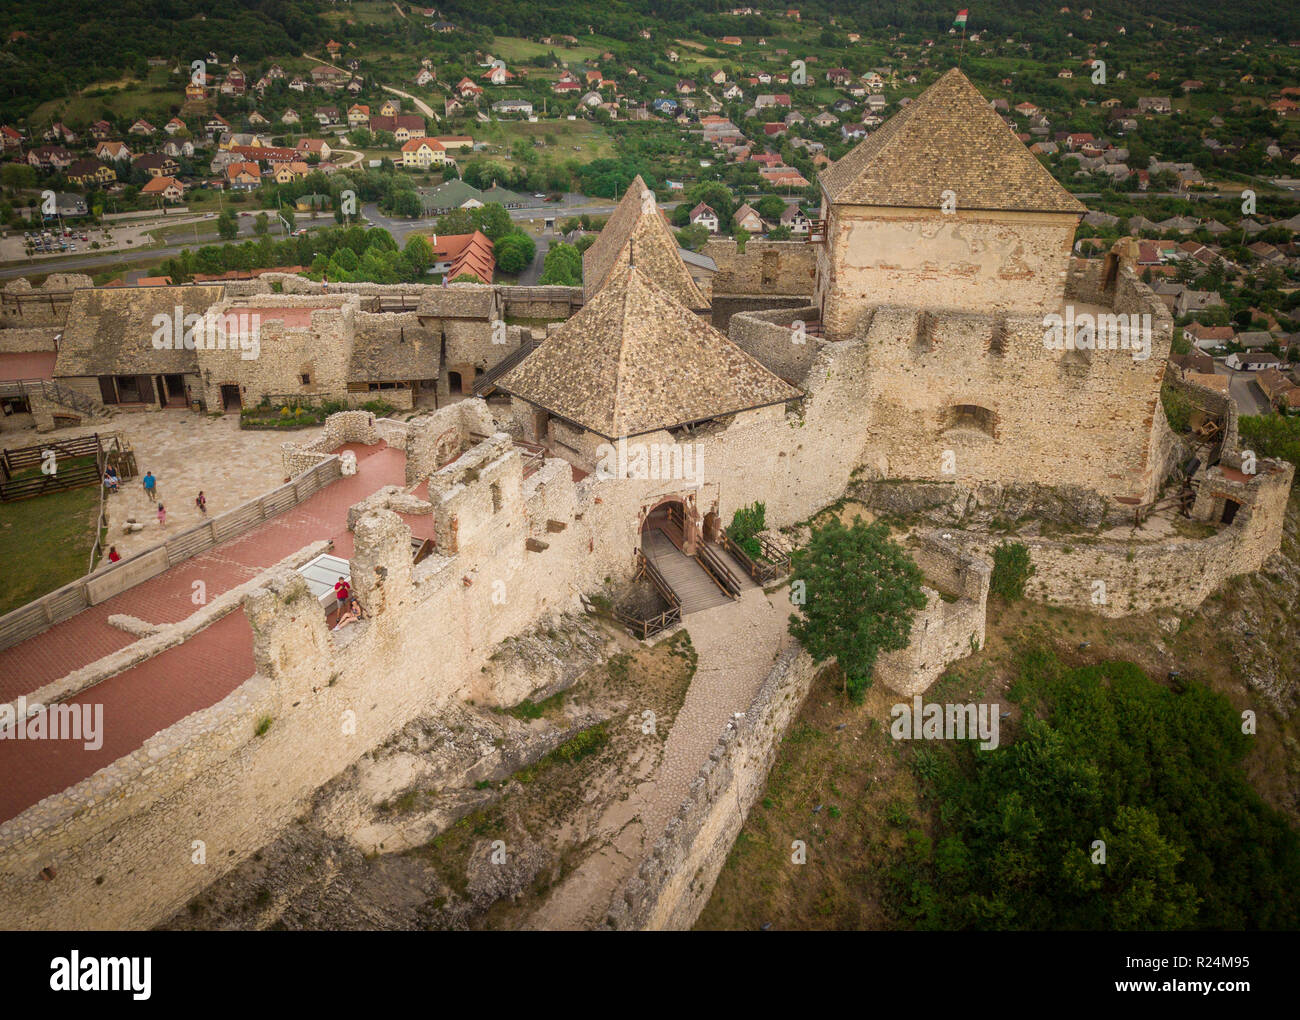 Aerial panorama of famous medieval castle ruin in Sumeg Hungary near the Lake Balaton partially restored with donjon, bastions, gate house, loop holes Stock Photo